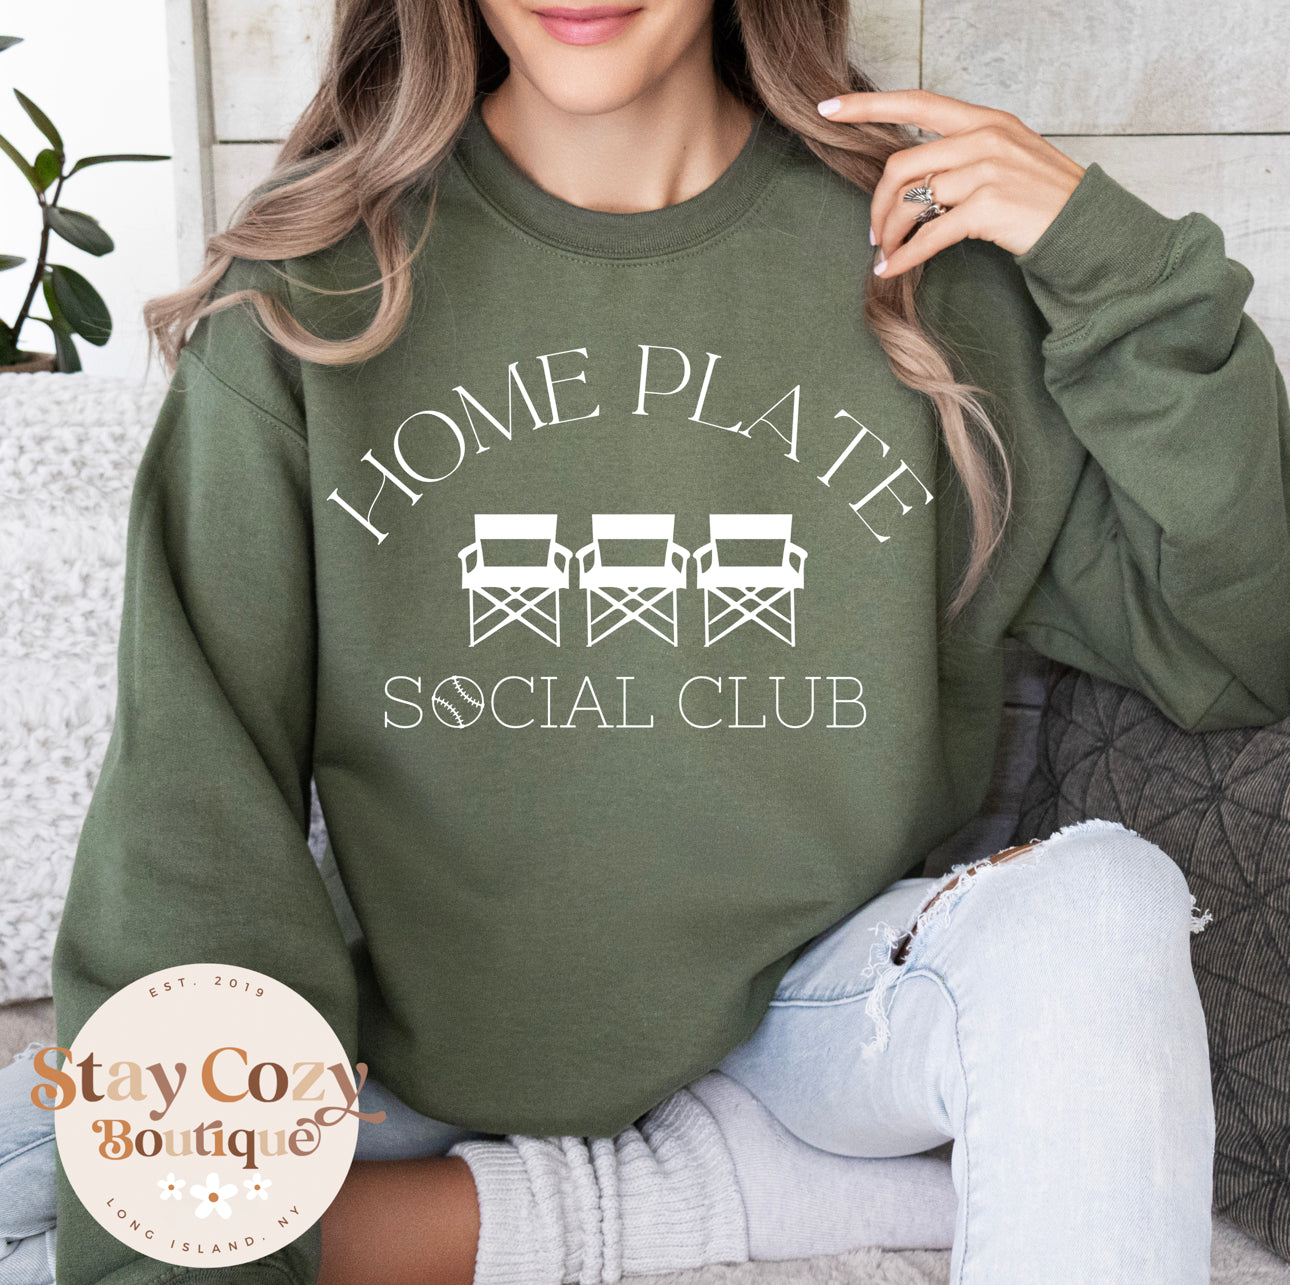 Home Plate Social Club Weekends are for Baseball Sweatshirt, Baseball Mom Sweatshirt, Baseball Mom Crewneck, Weekends are for Baseball Sweatshirt